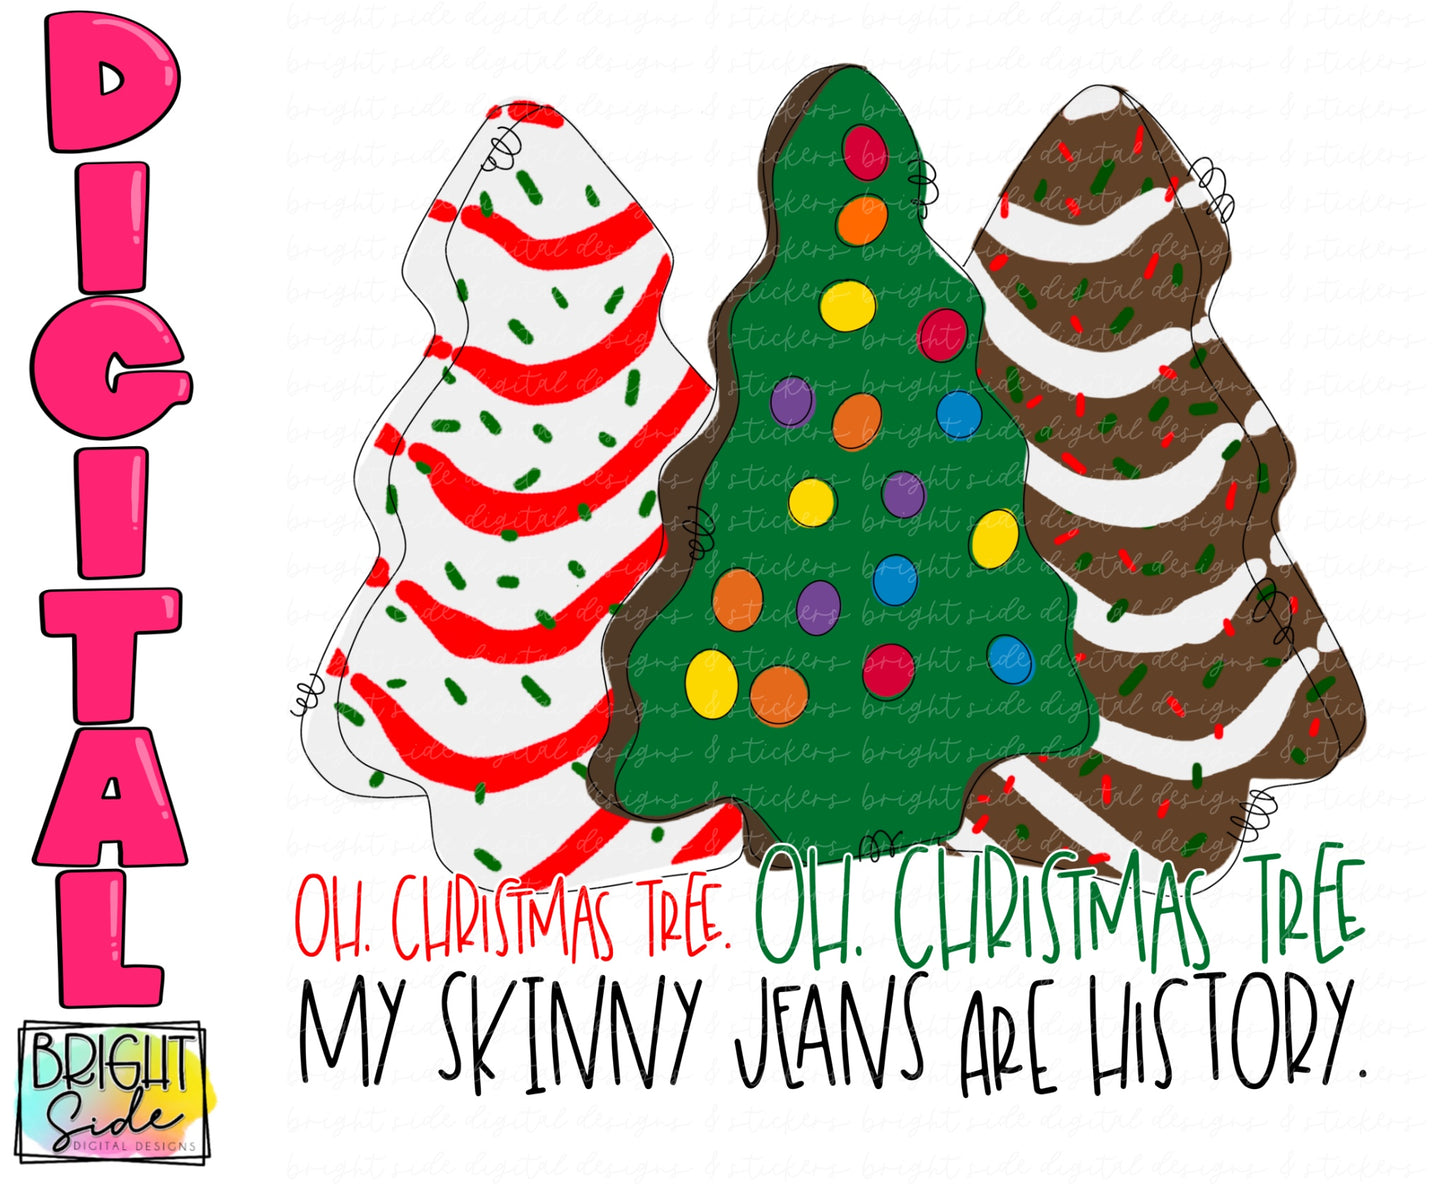 Oh Christmas tree oh Christmas tree my skinny jeans are history